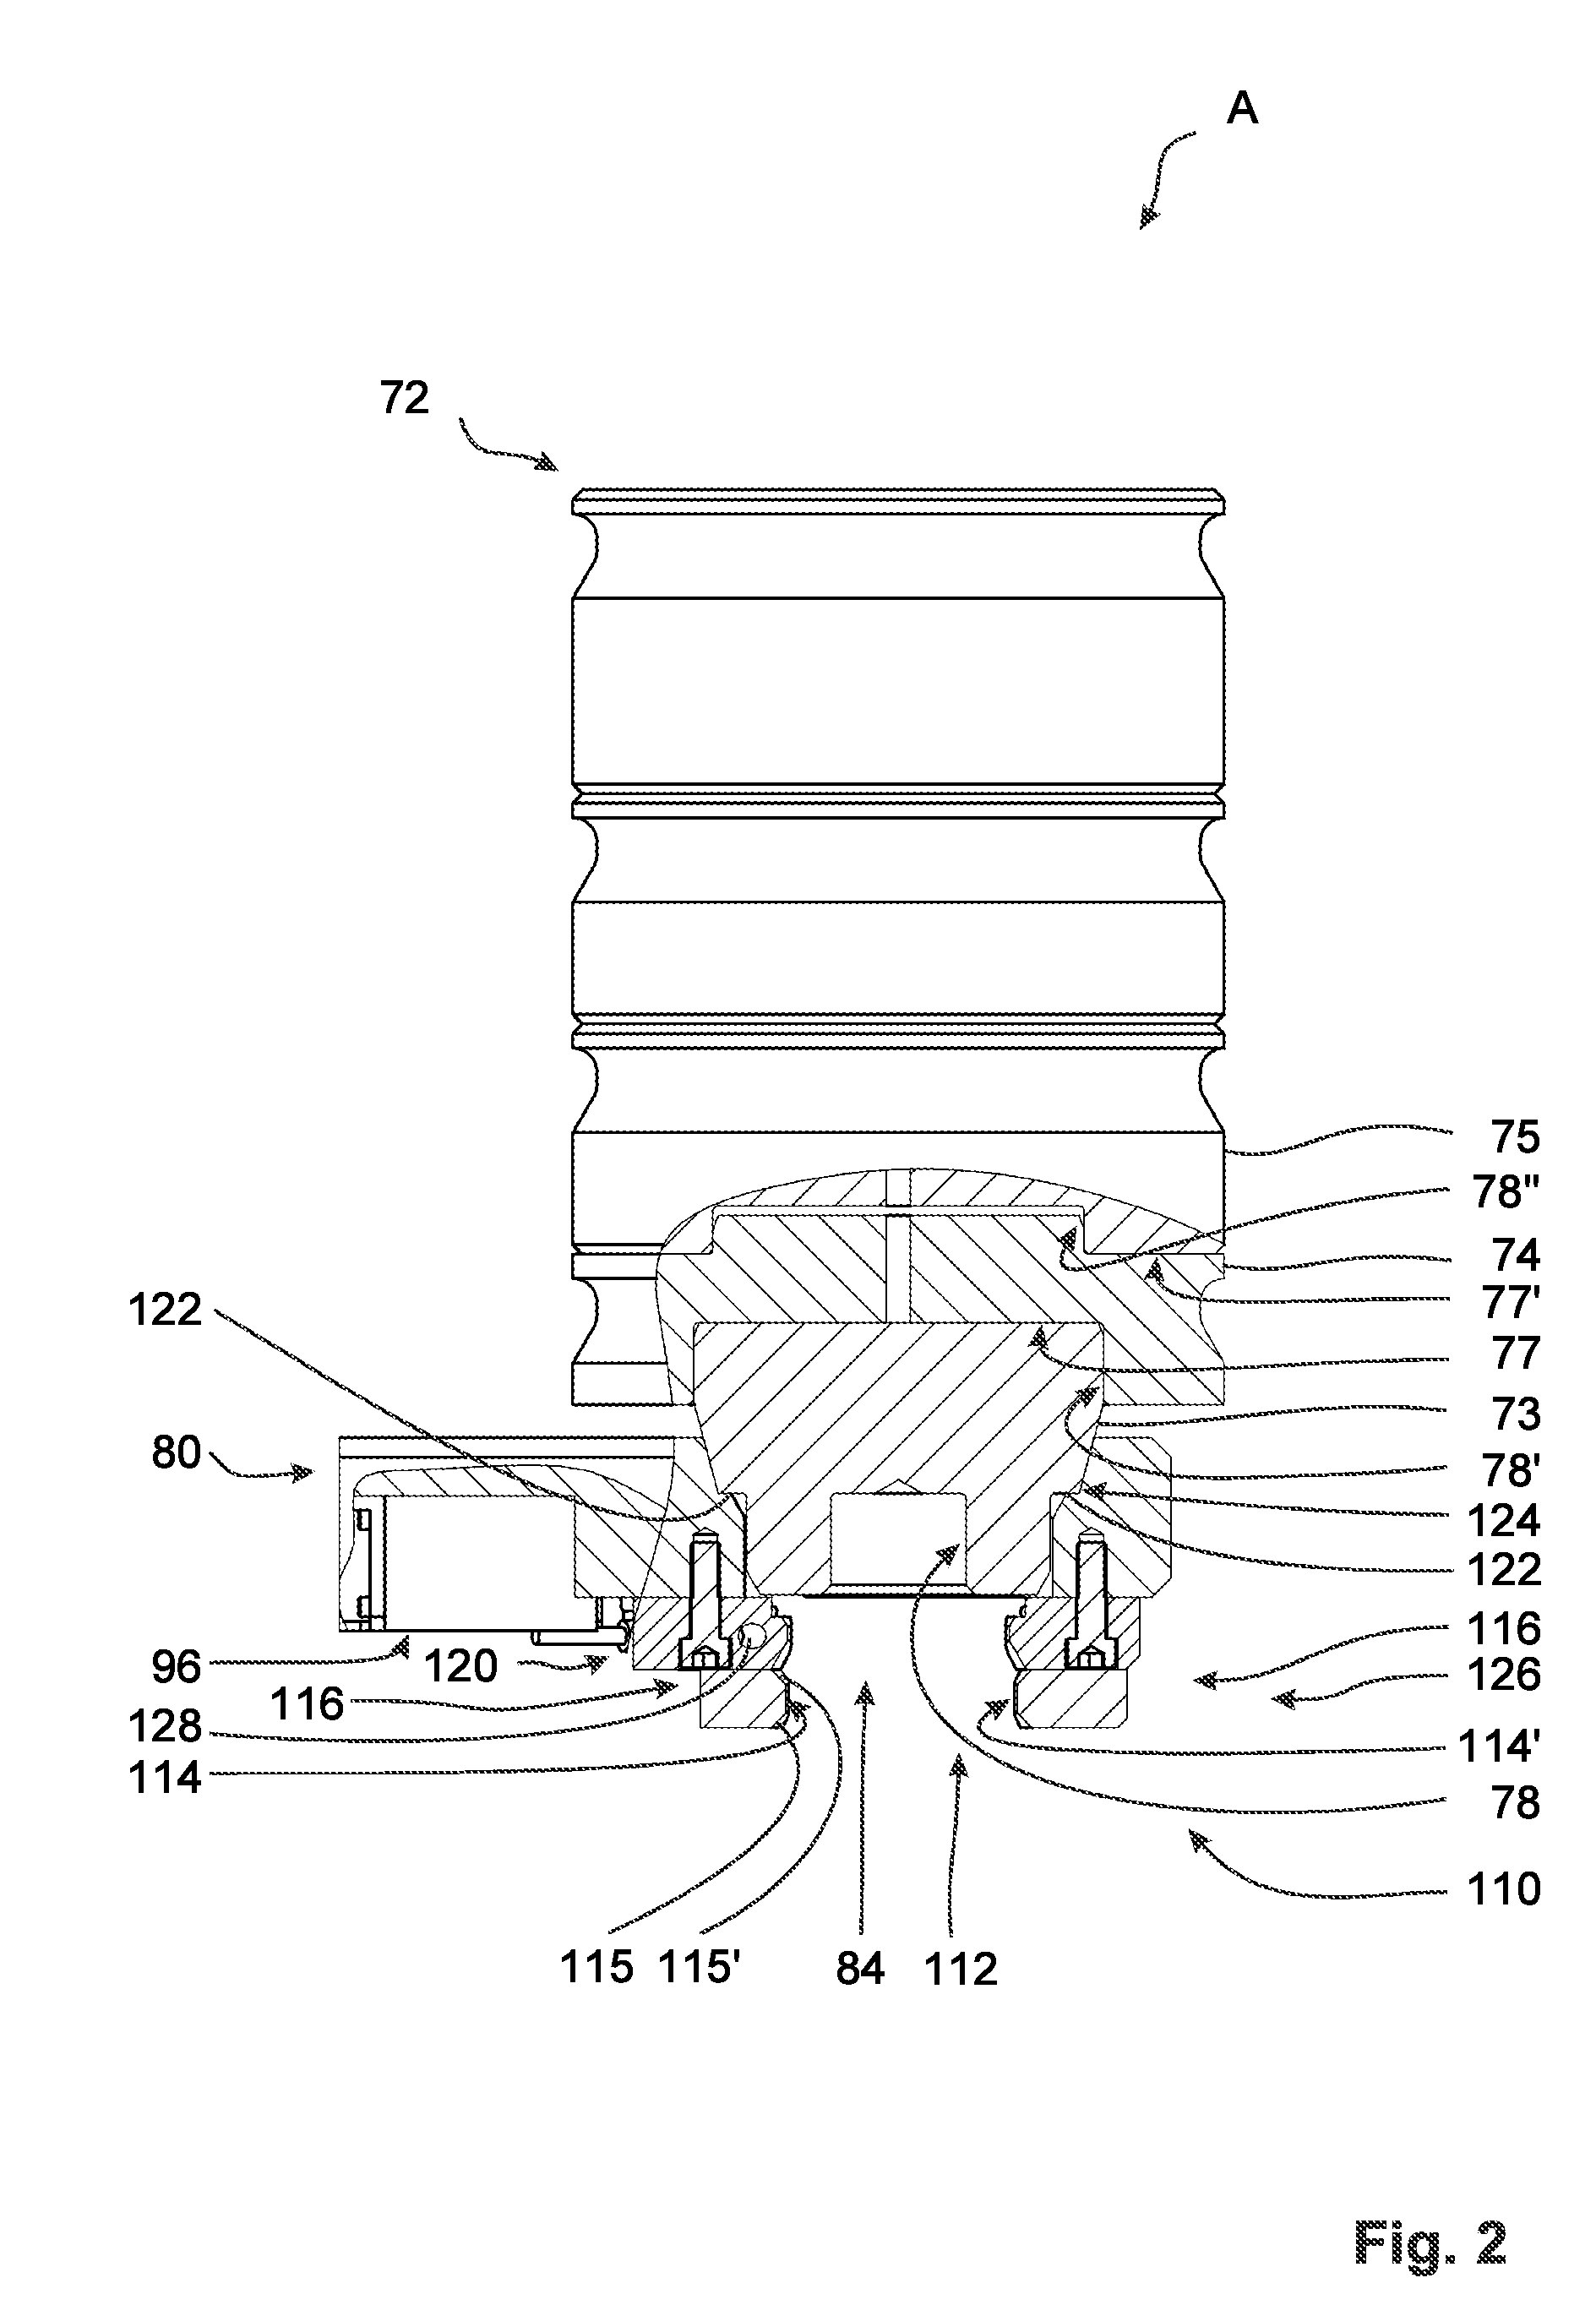 Flow test machine and an associated measurement method, as well as an associated cleaning process